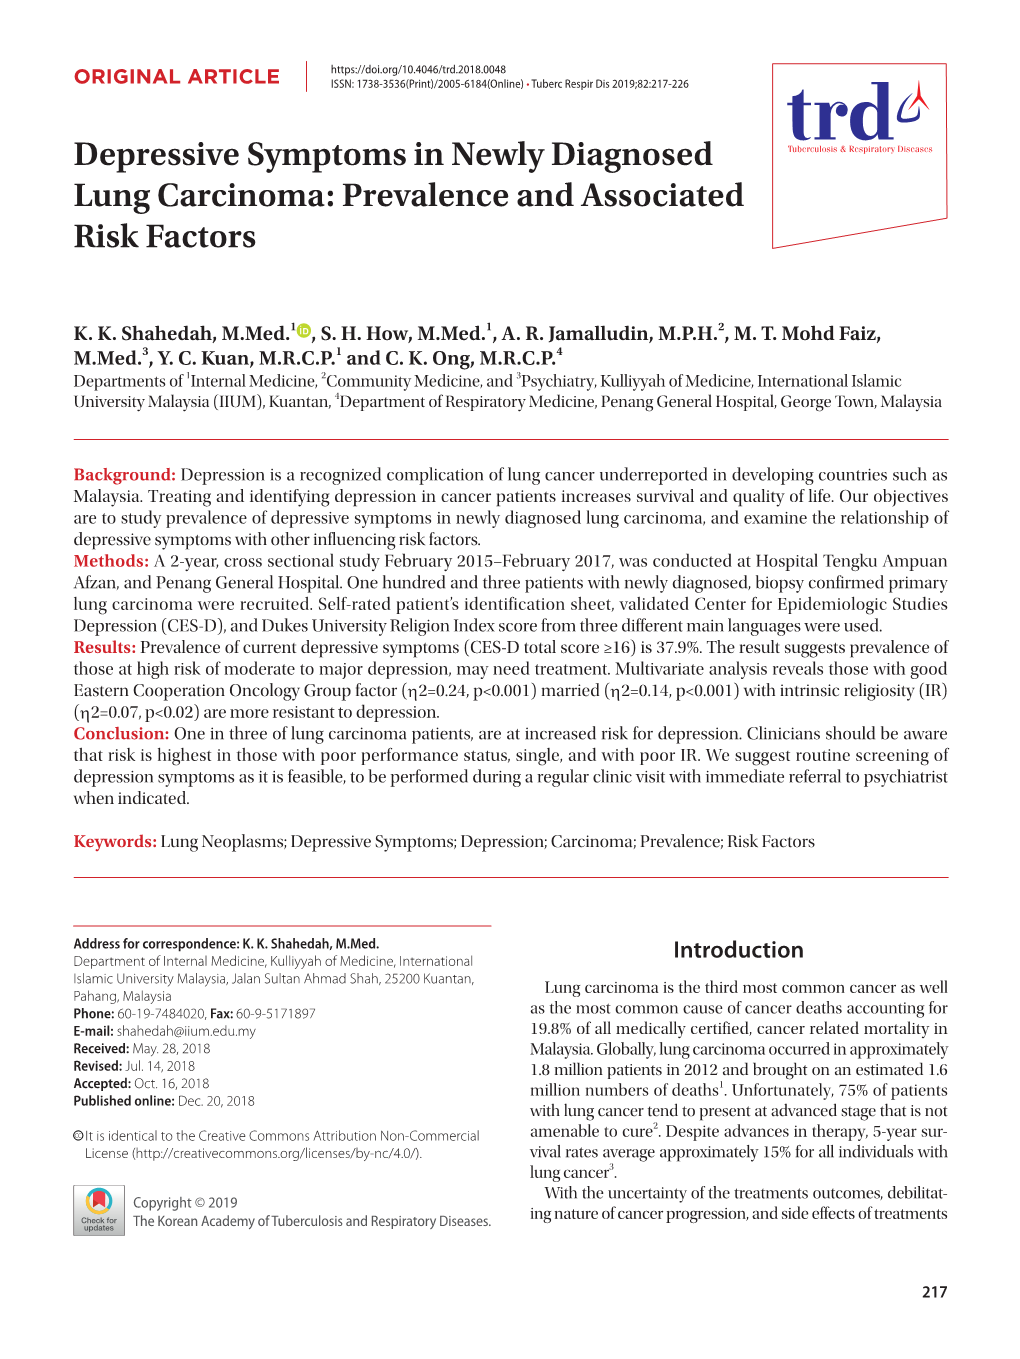 Depressive Symptoms in Newly Diagnosed Lung Carcinoma: Prevalence and Associated Risk Factors